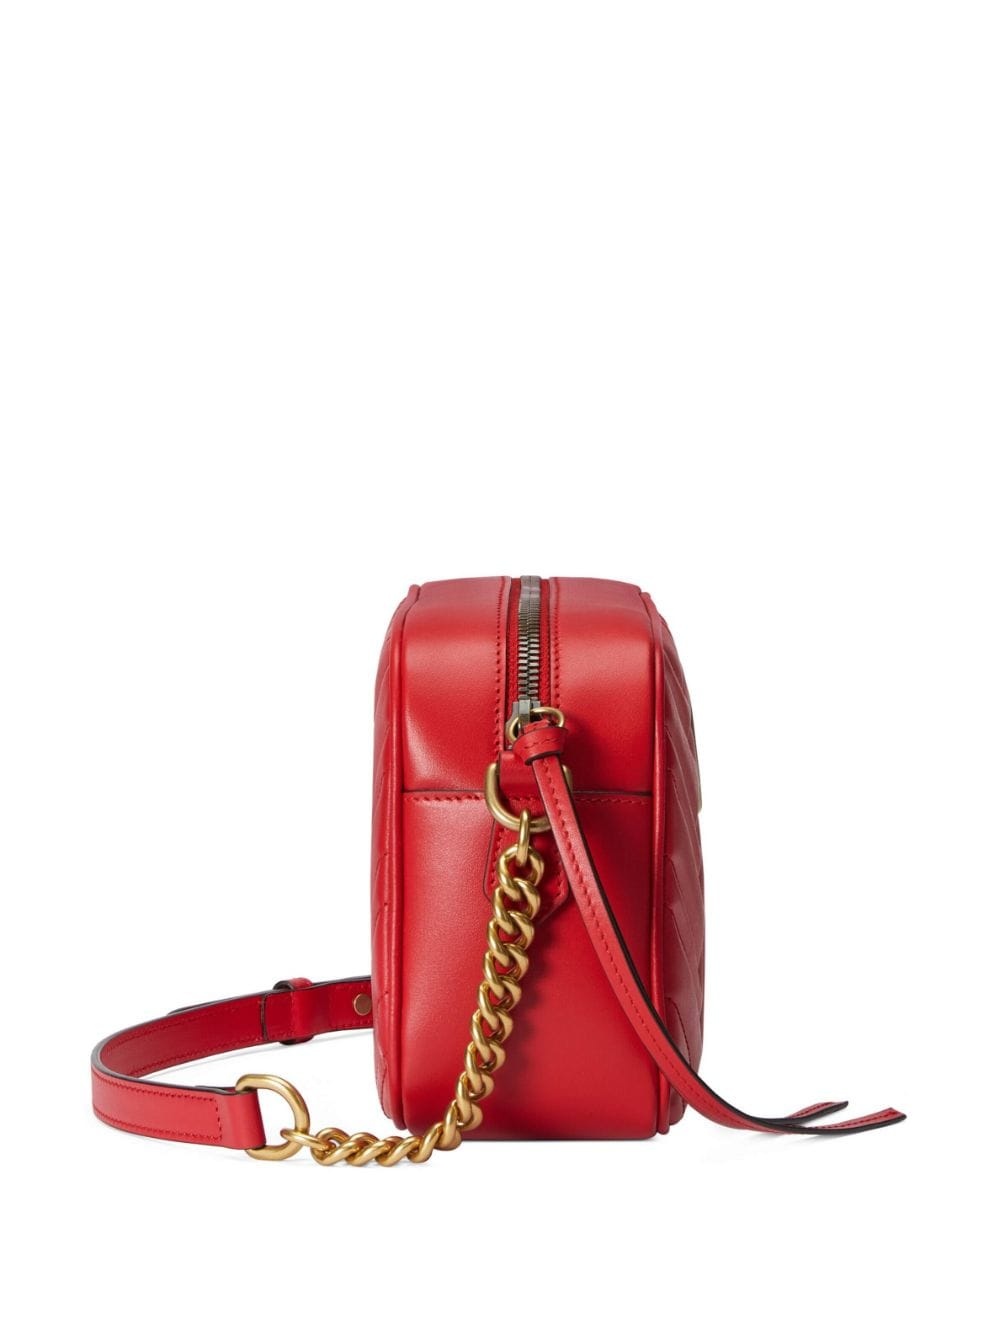 Gg marmont small leather shoulder bag - 5